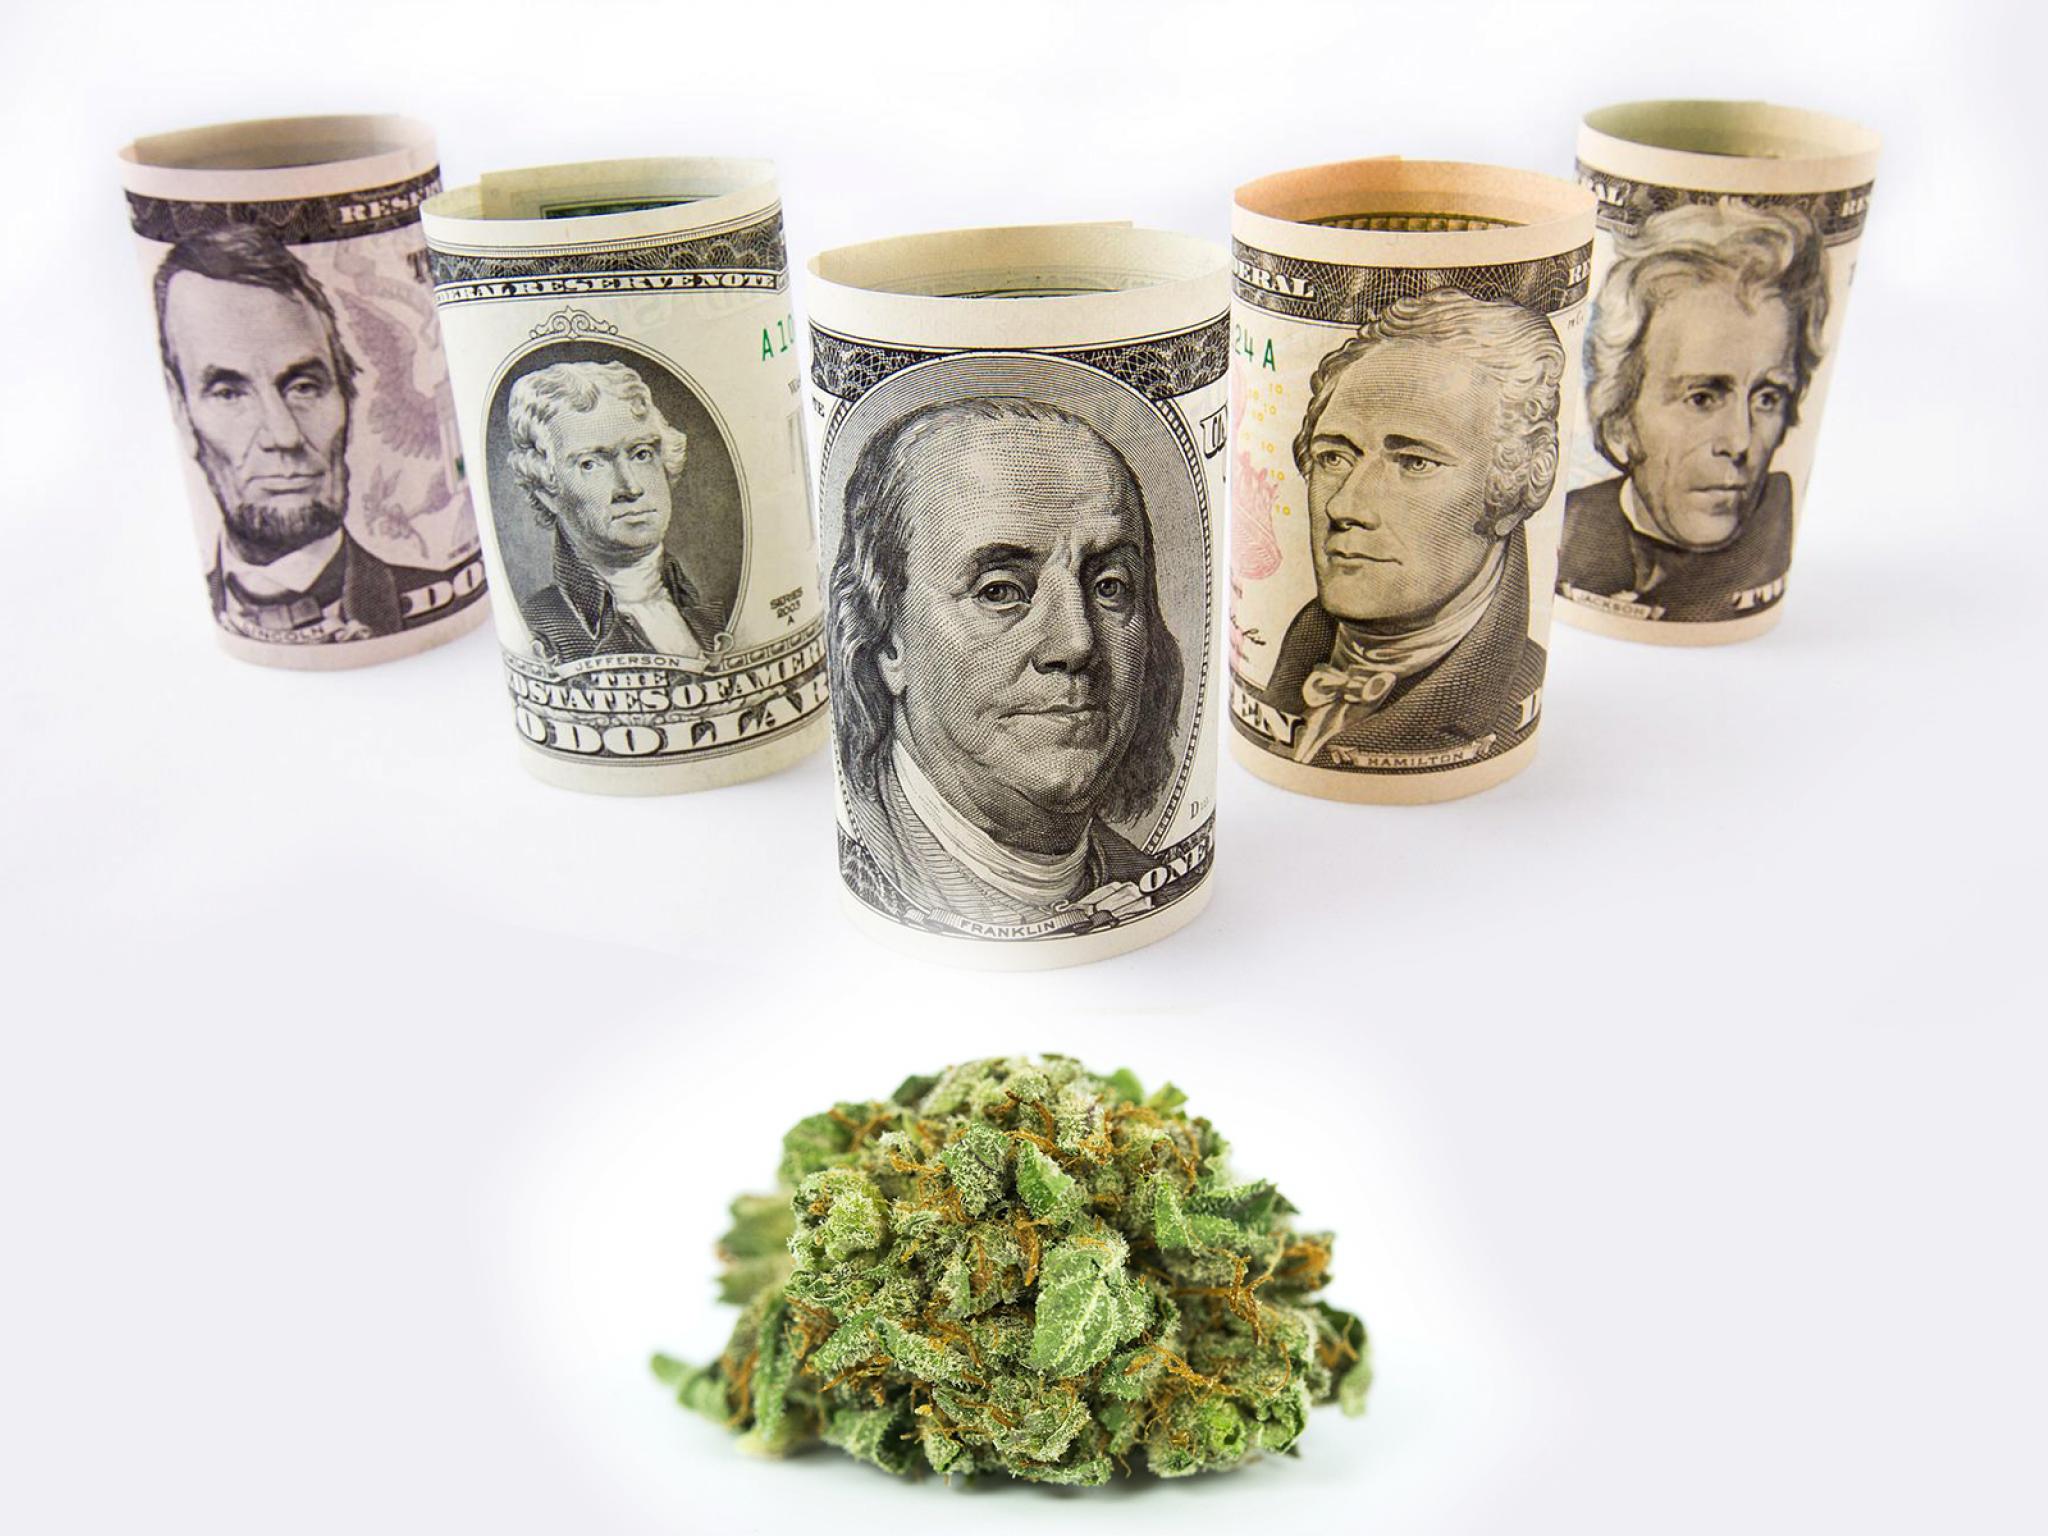  california-weed-co-settles-debt-and-celebrates-turn-around-in-q3 